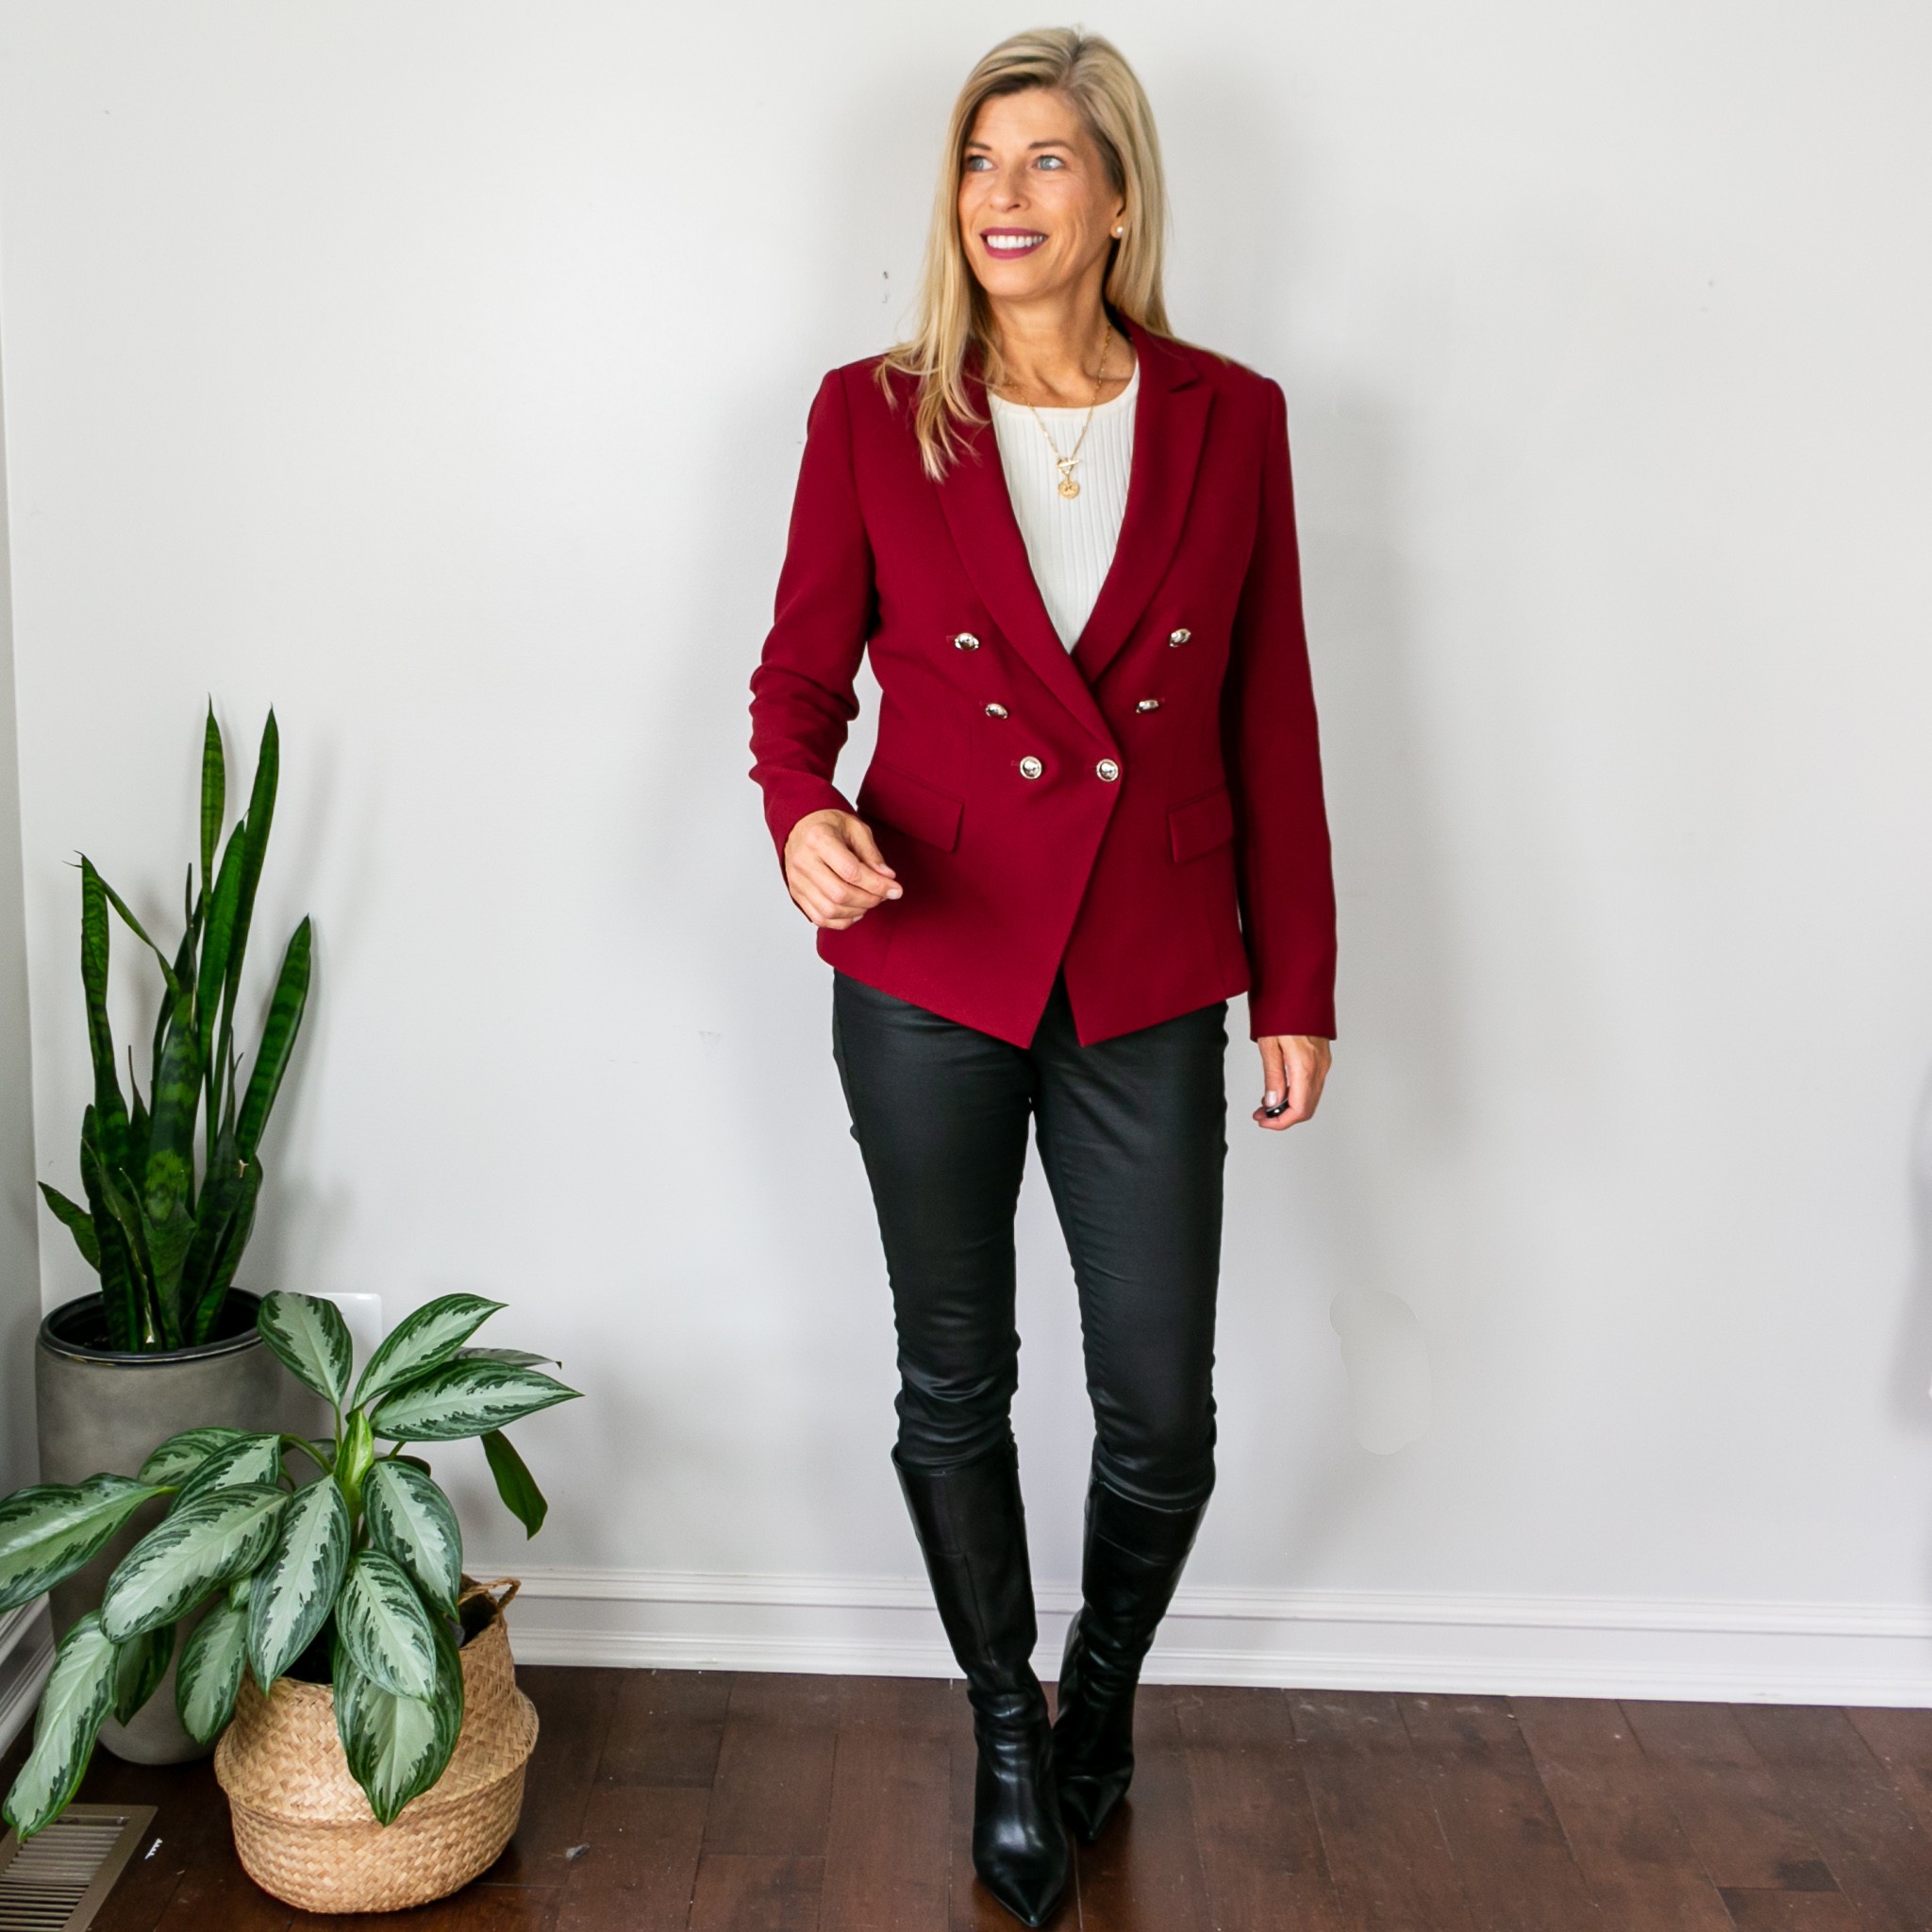 Red Blazer outfits with blazers and jeans